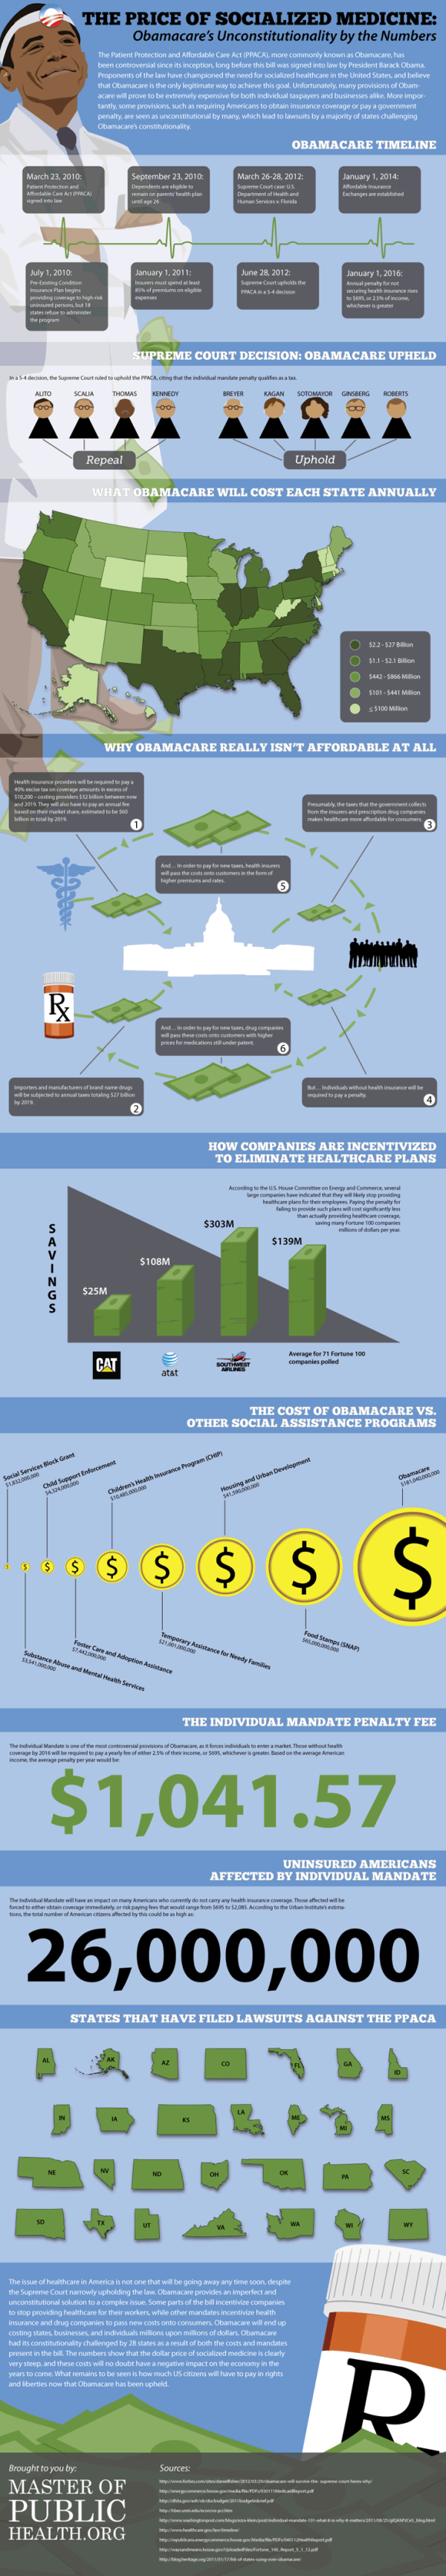 Obamacare: The Price of Socialized Medicine infographic